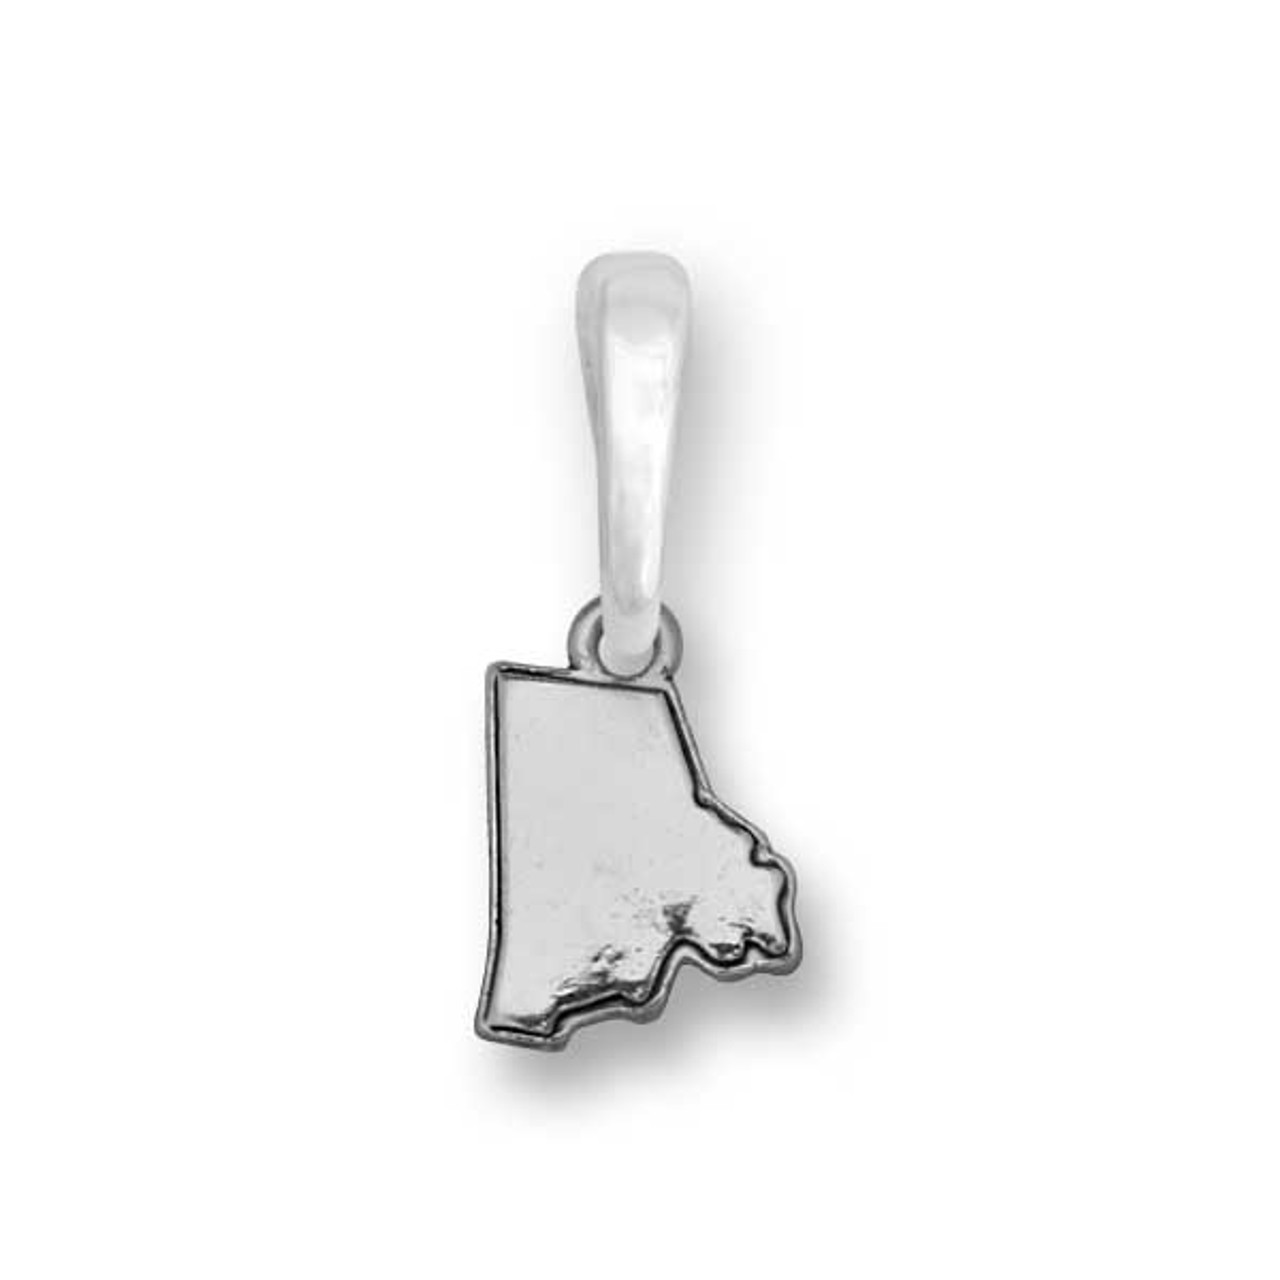 Charming Choices Charm- State / Choose Any State